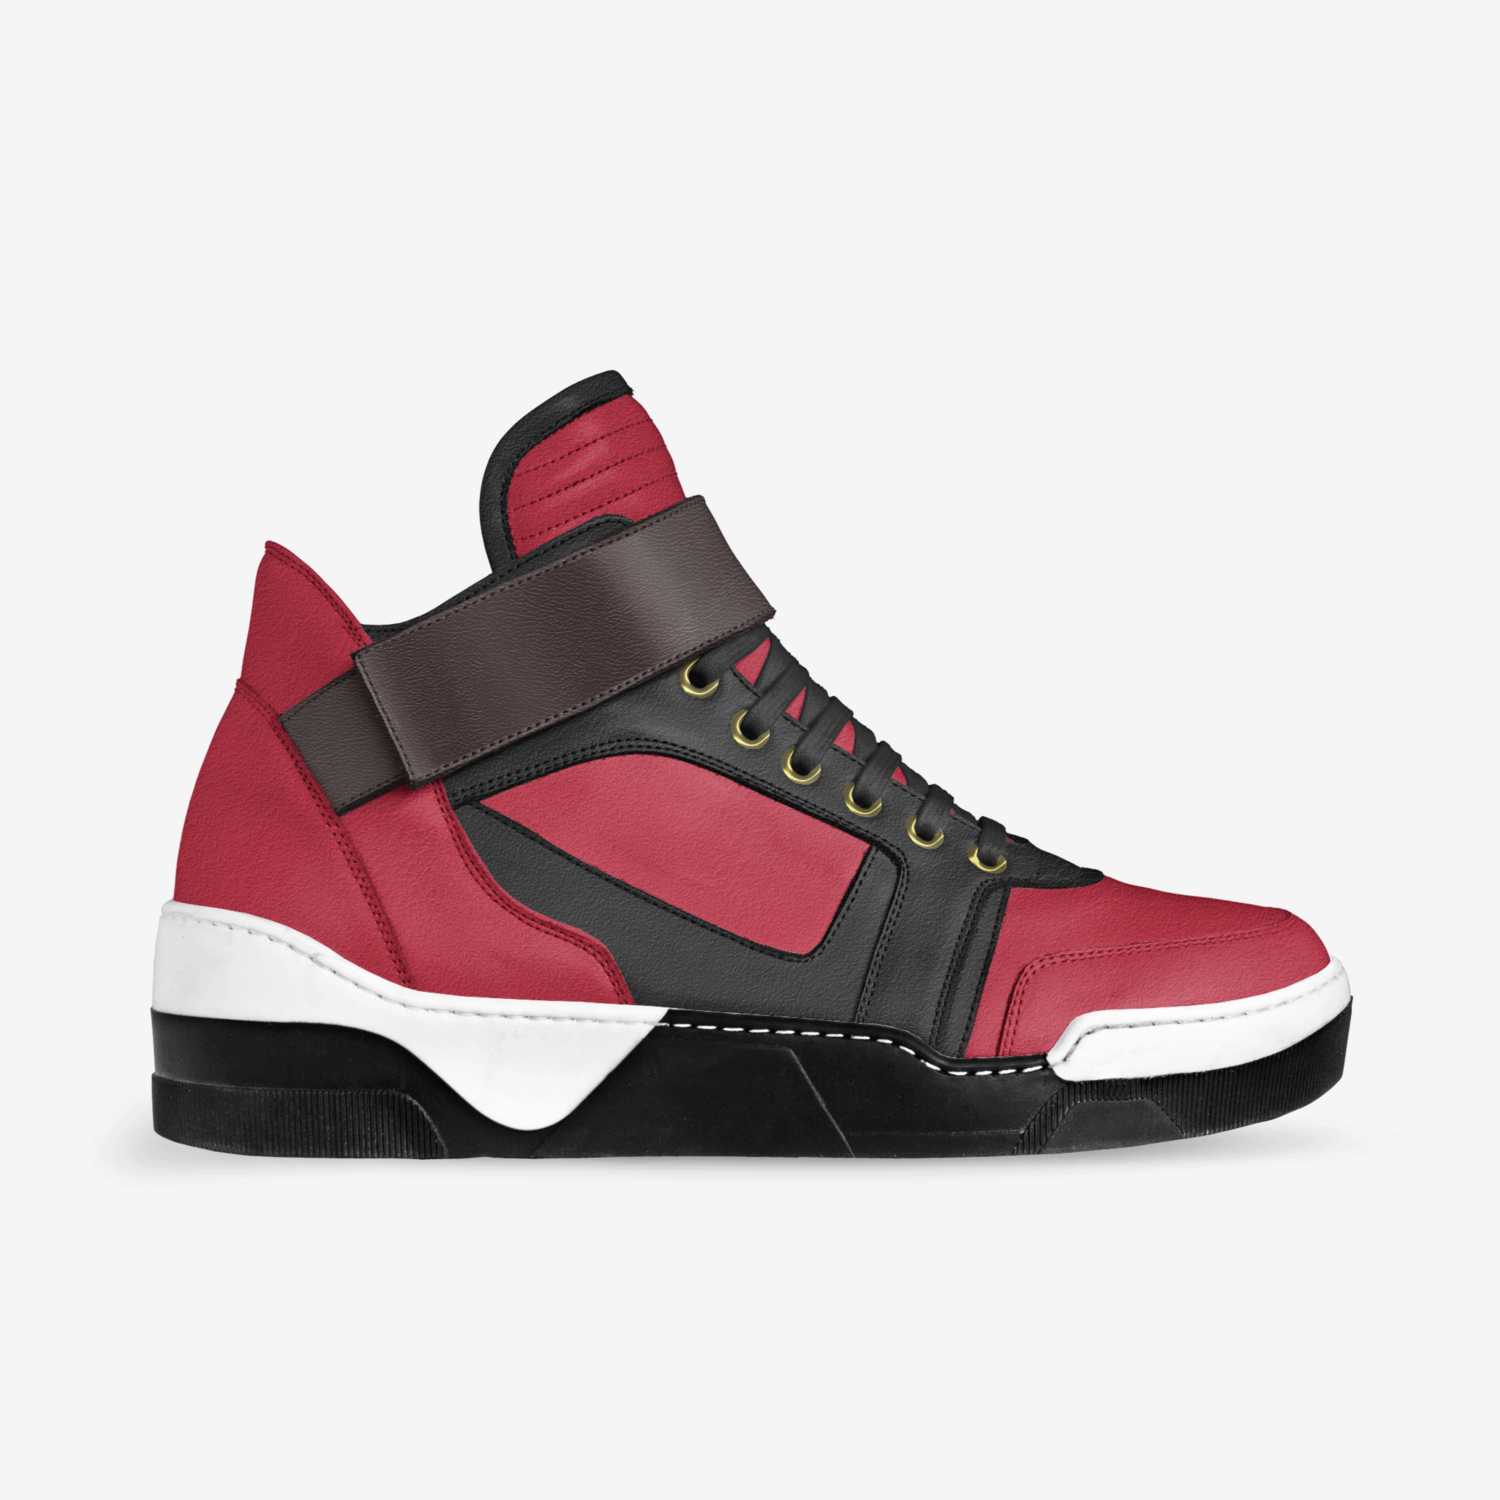 condor superflight custom made in Italy shoes by Marcusboccioletti | Side view